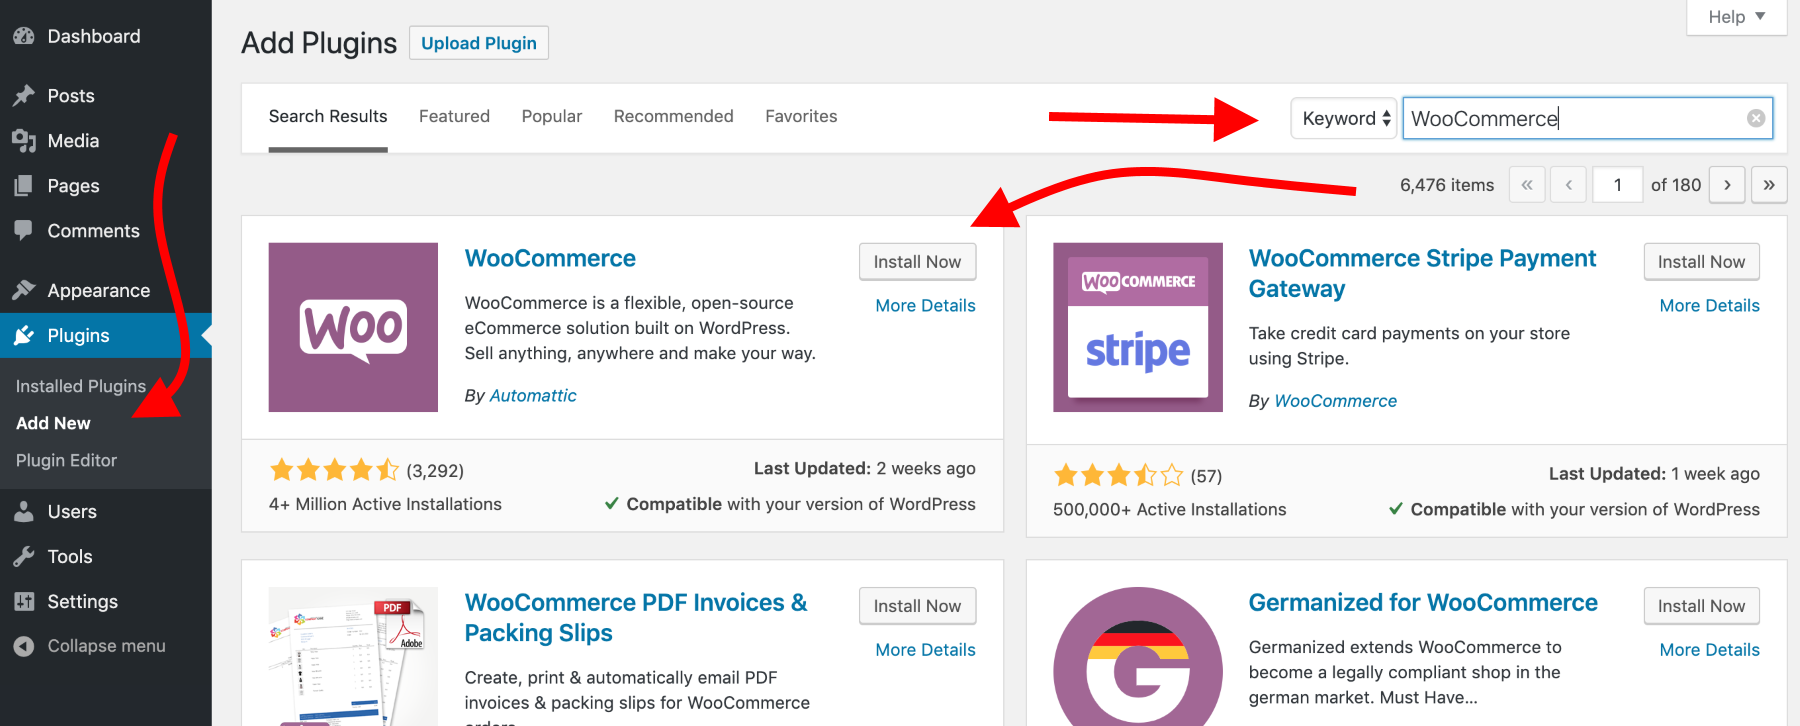 WooCommerce install - this is how you start an online store